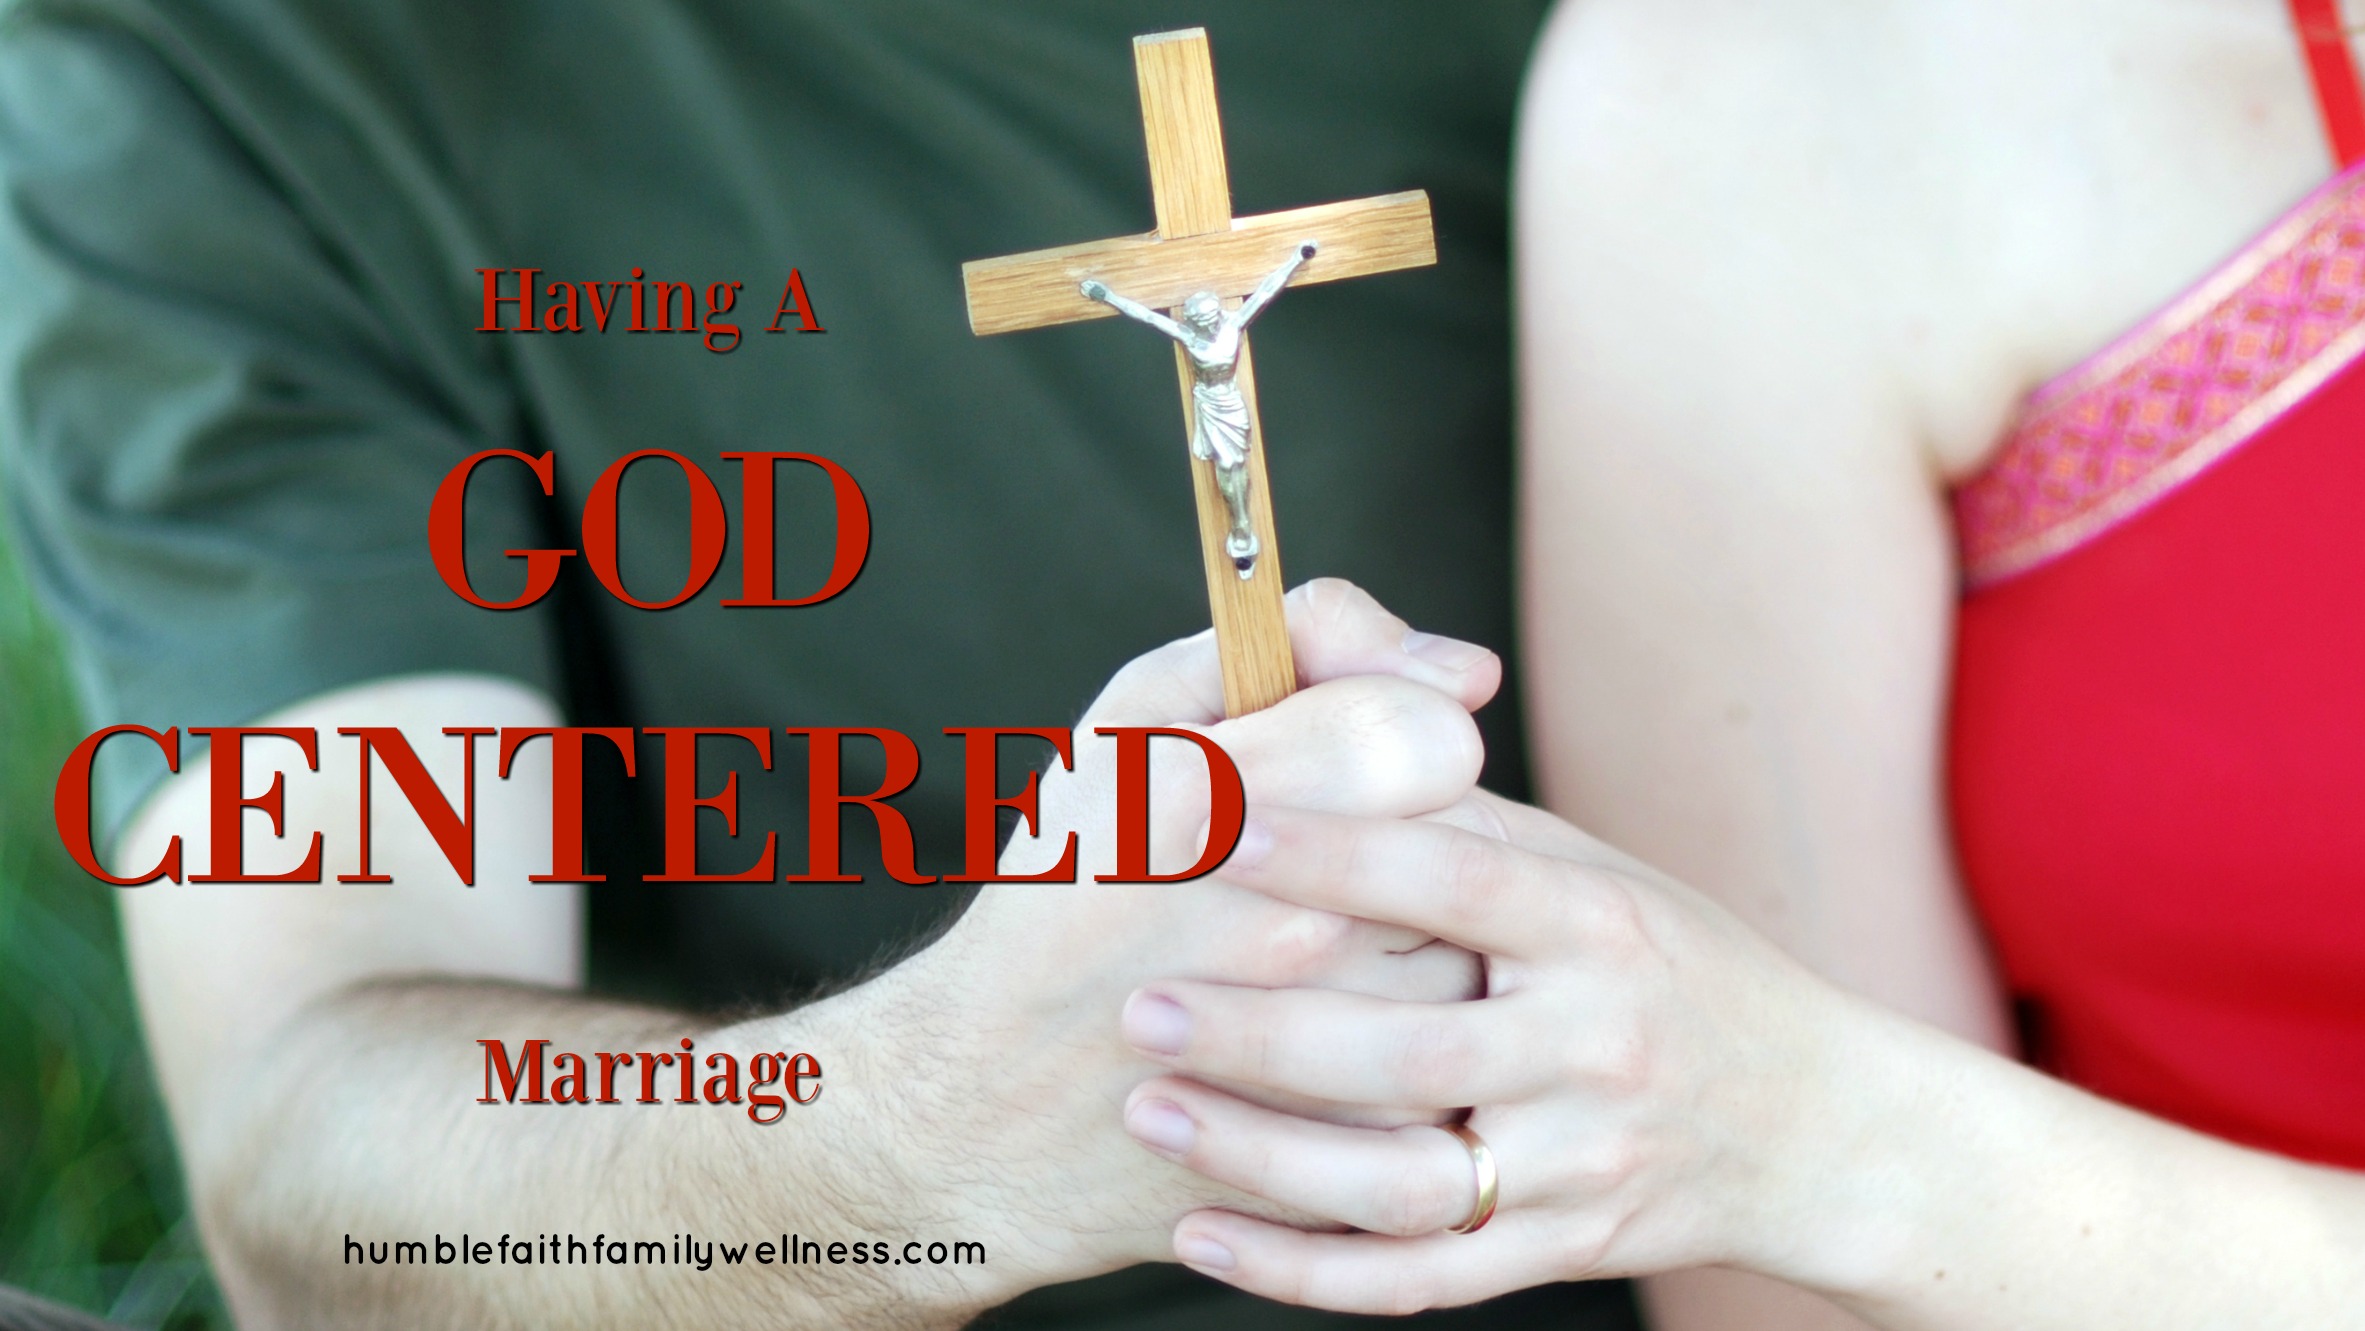 Having a God Centered Marriage